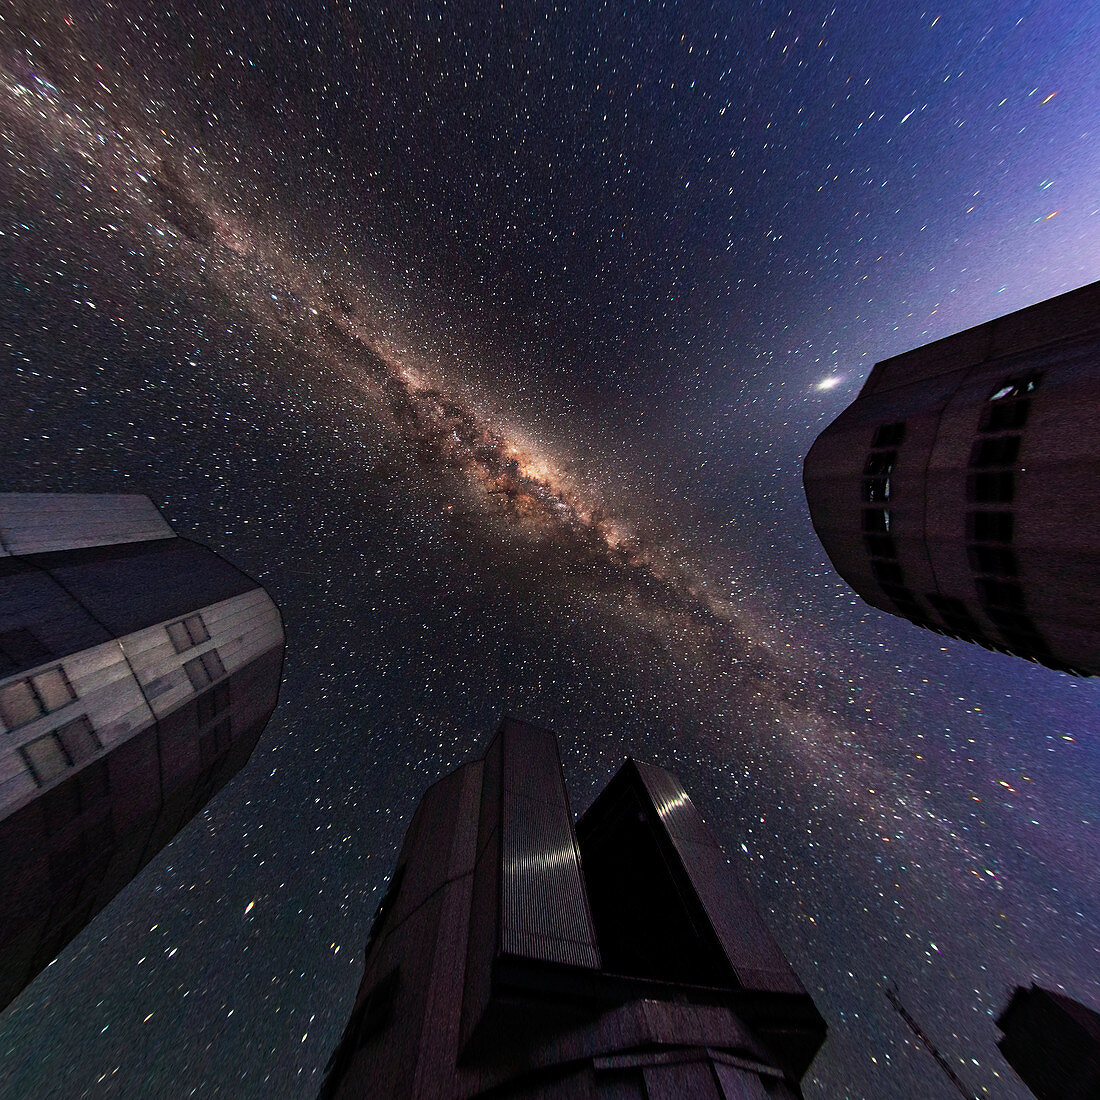 Milky Way over the Very Large Telescope